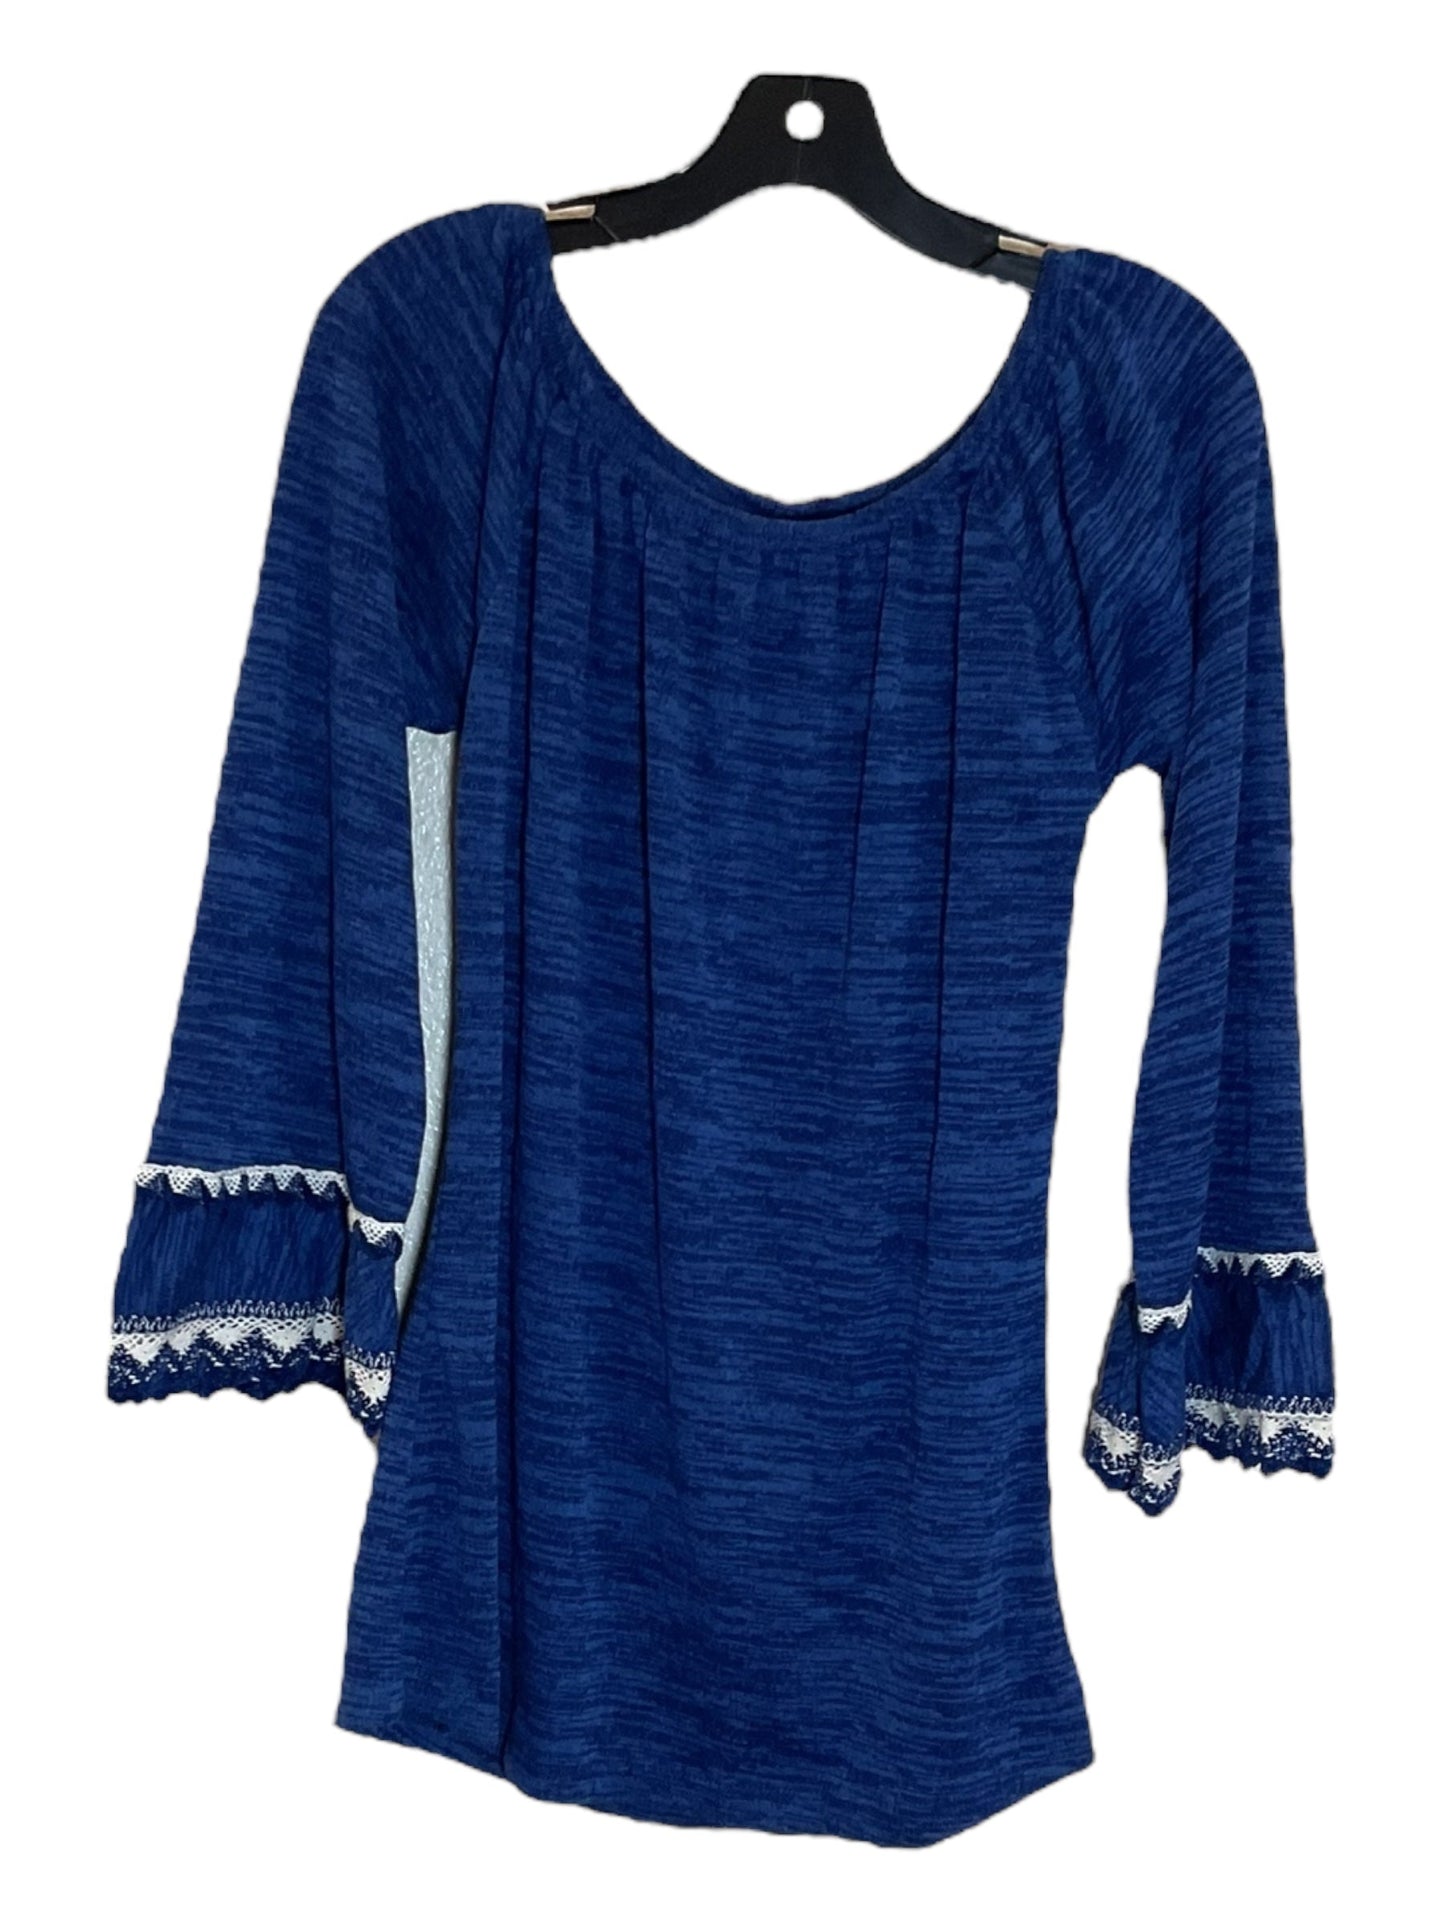 Blue Tunic 3/4 Sleeve Clothes Mentor, Size S